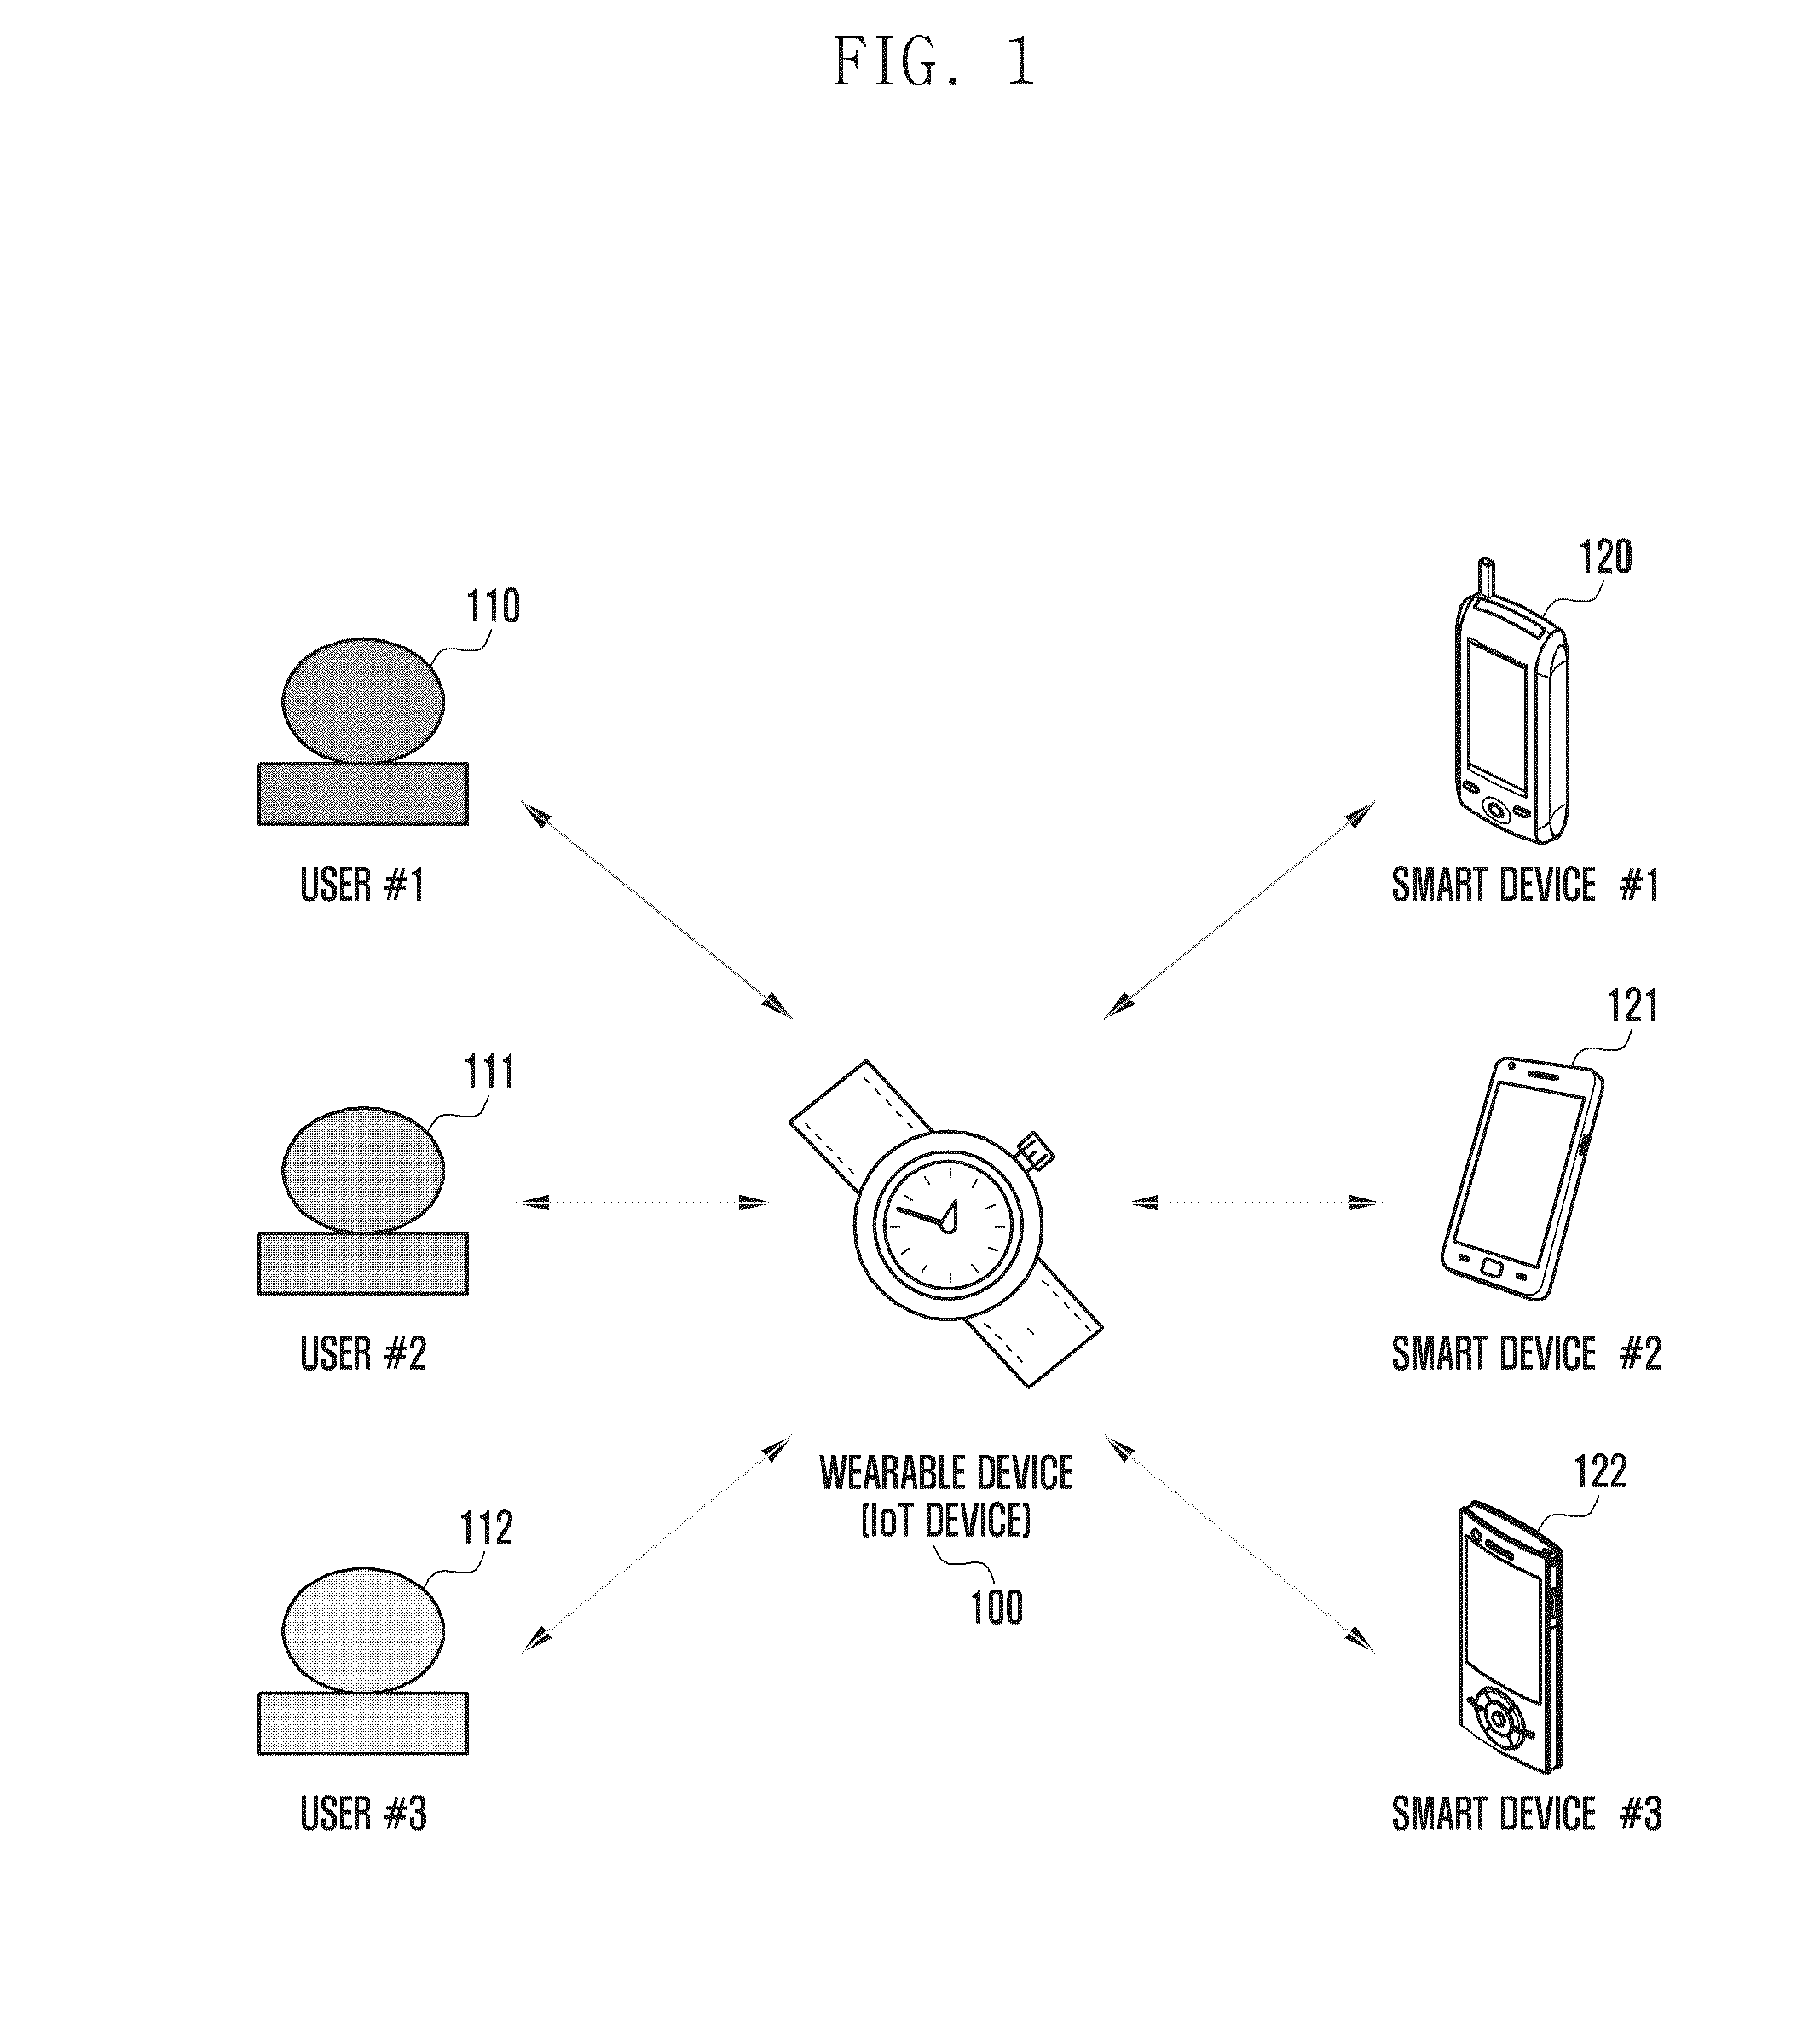 Method and apparatus for pairing a wearable device and a smart device